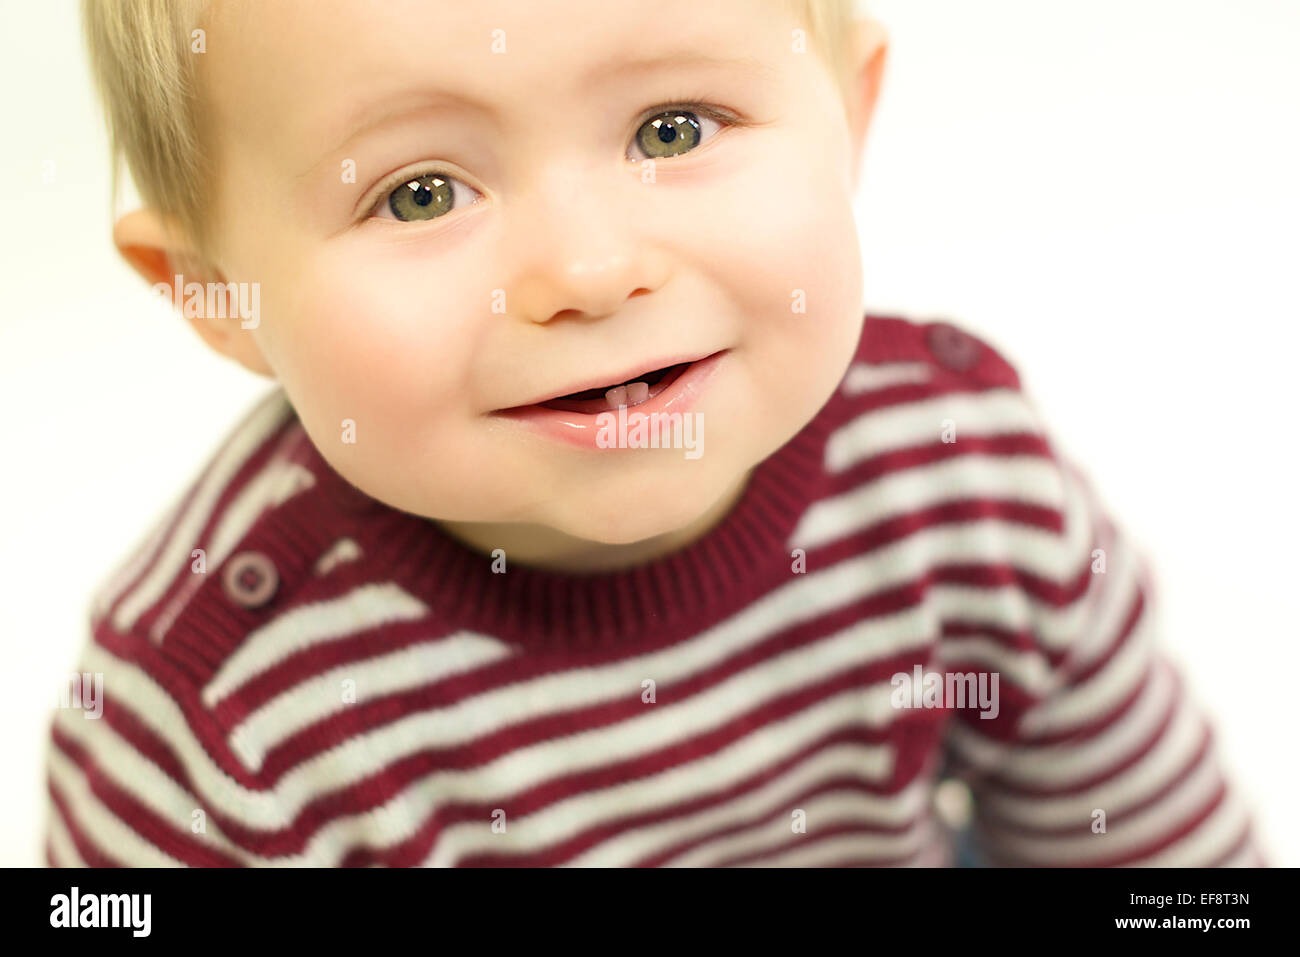 Portrait of a smiling baby boy Stock Photo